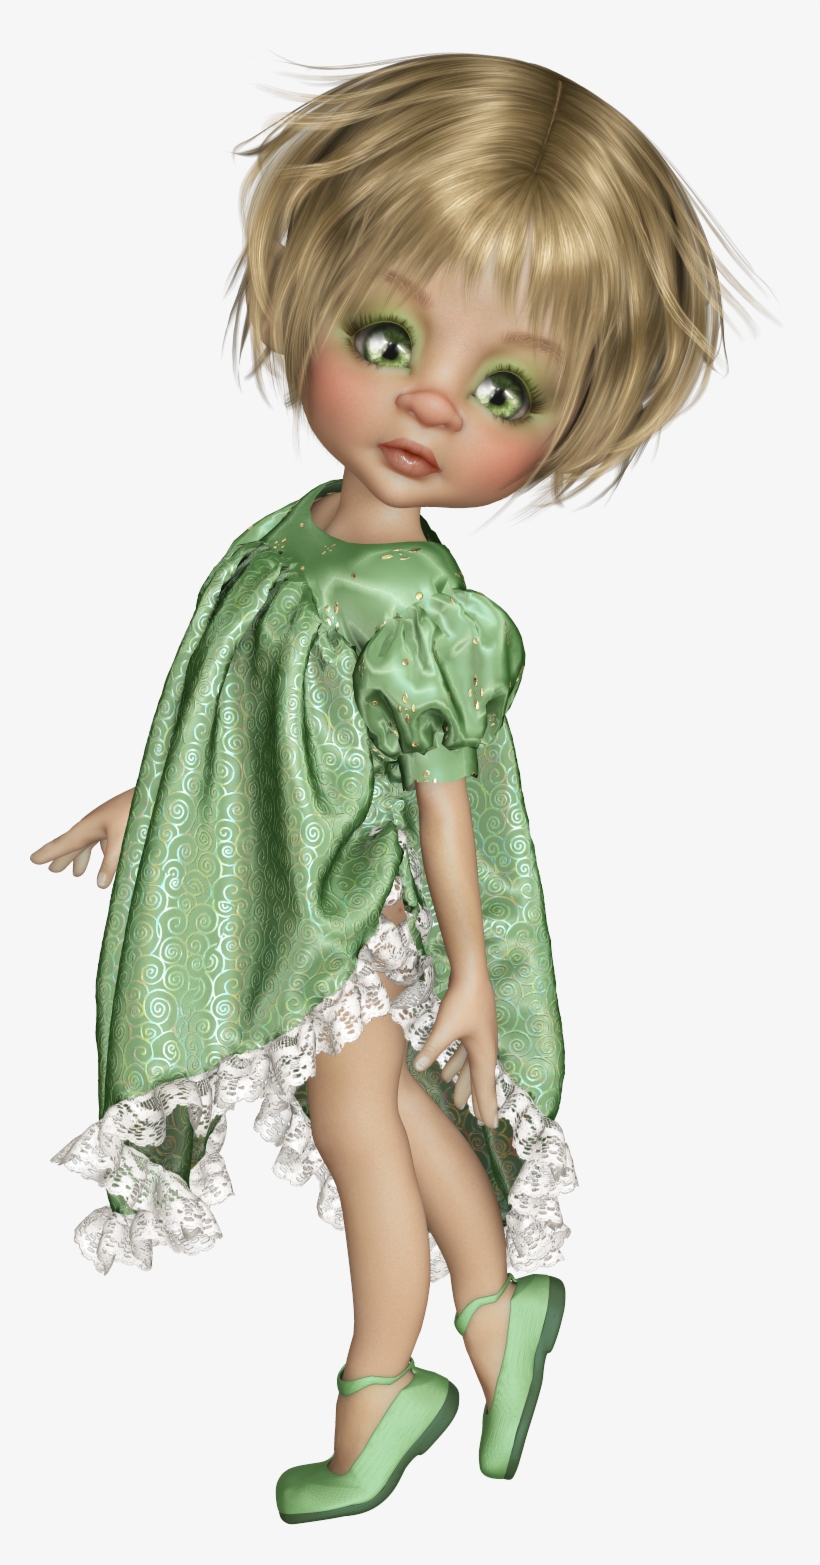 ╰⊰✿gs✿⊱╮ Cookies For Kids, Cute Cookies, Cute Fairy - Doll, transparent png #5965811